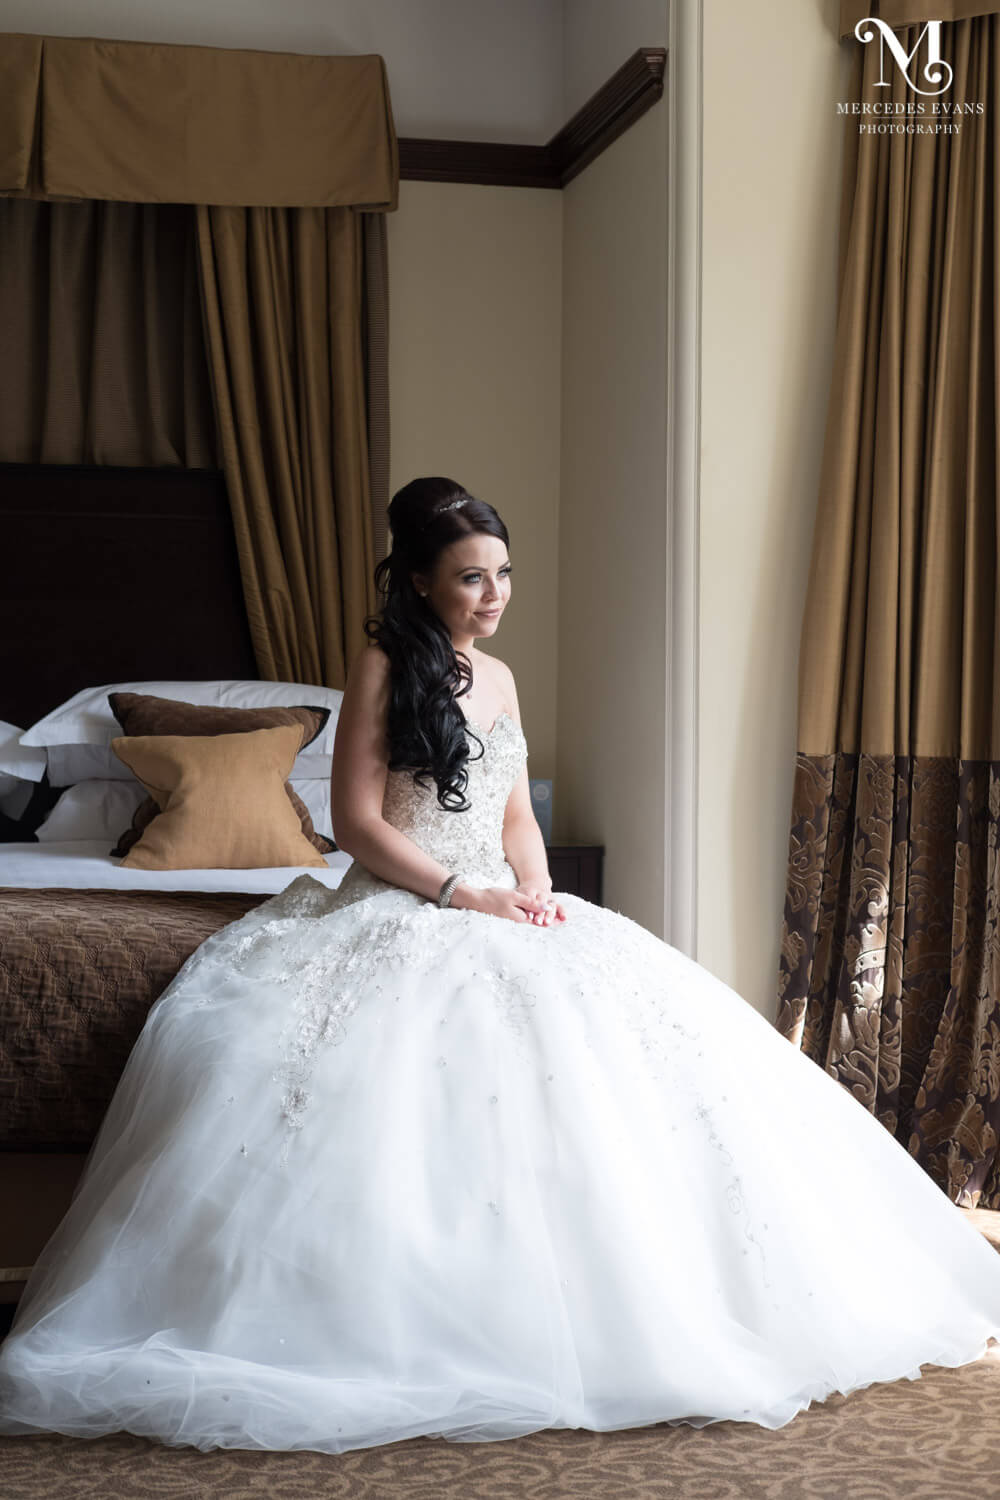 The bride sits on the bed and looks out of the window in the honeymoon suite at Frimley Hall